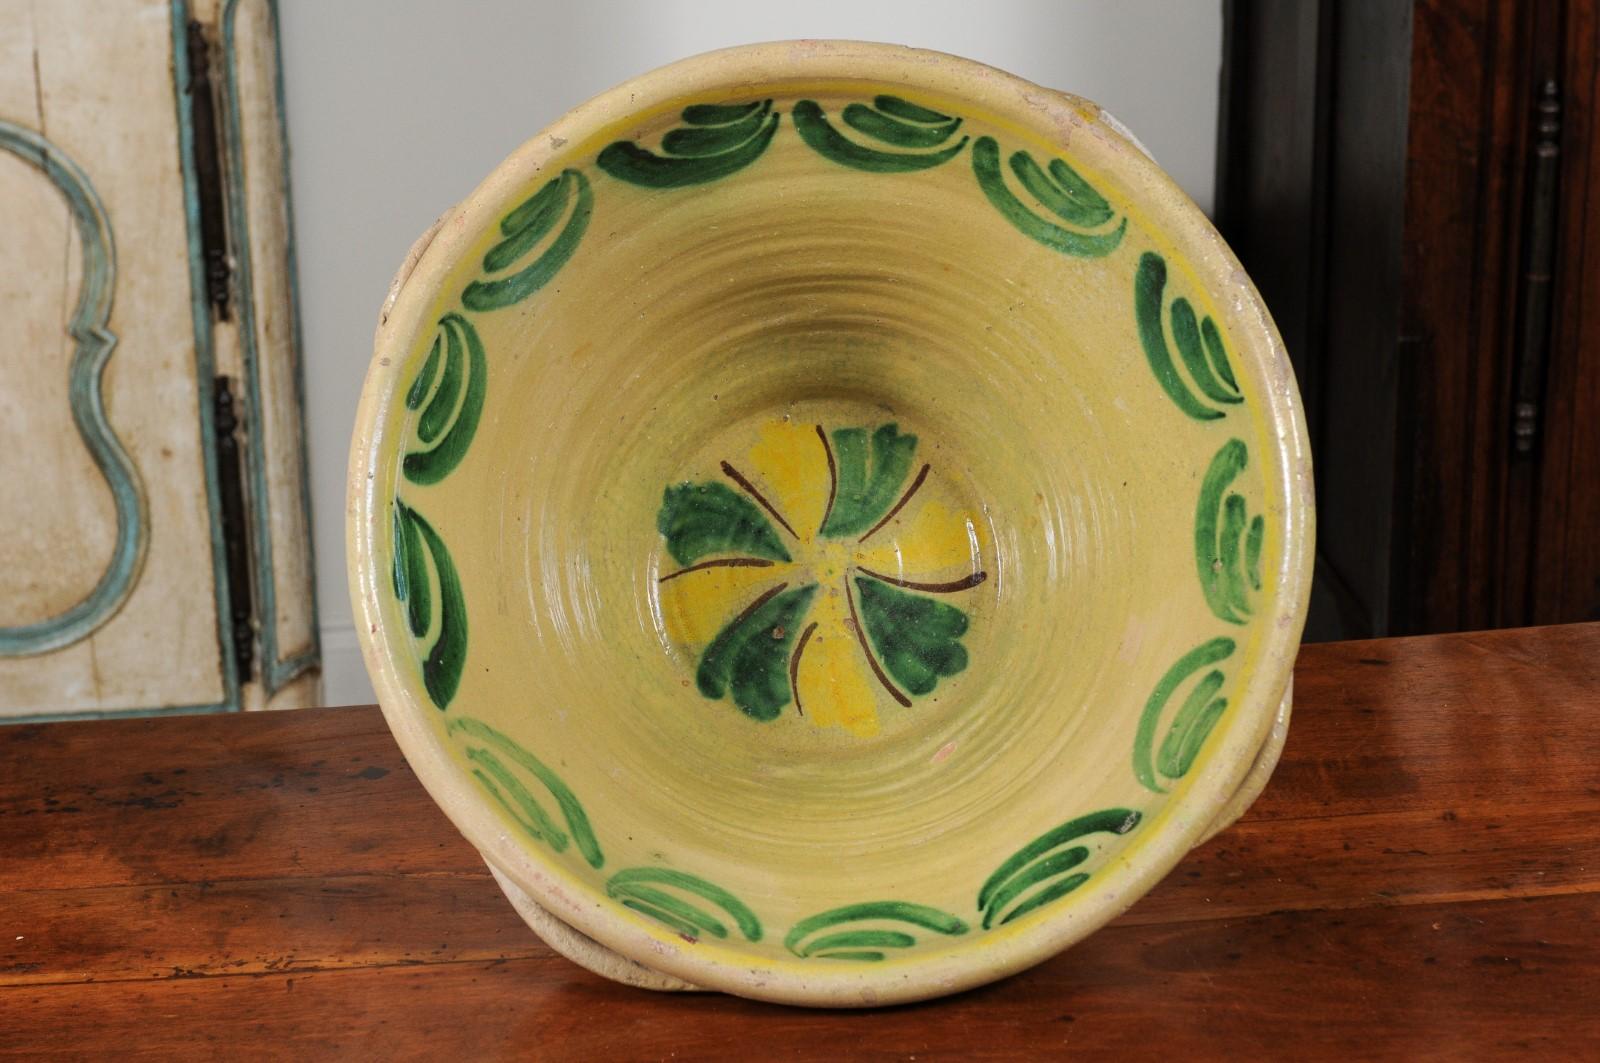 Italian 1820s Yellow Glazed Pottery Bowl from Calabria with Green Accents 4